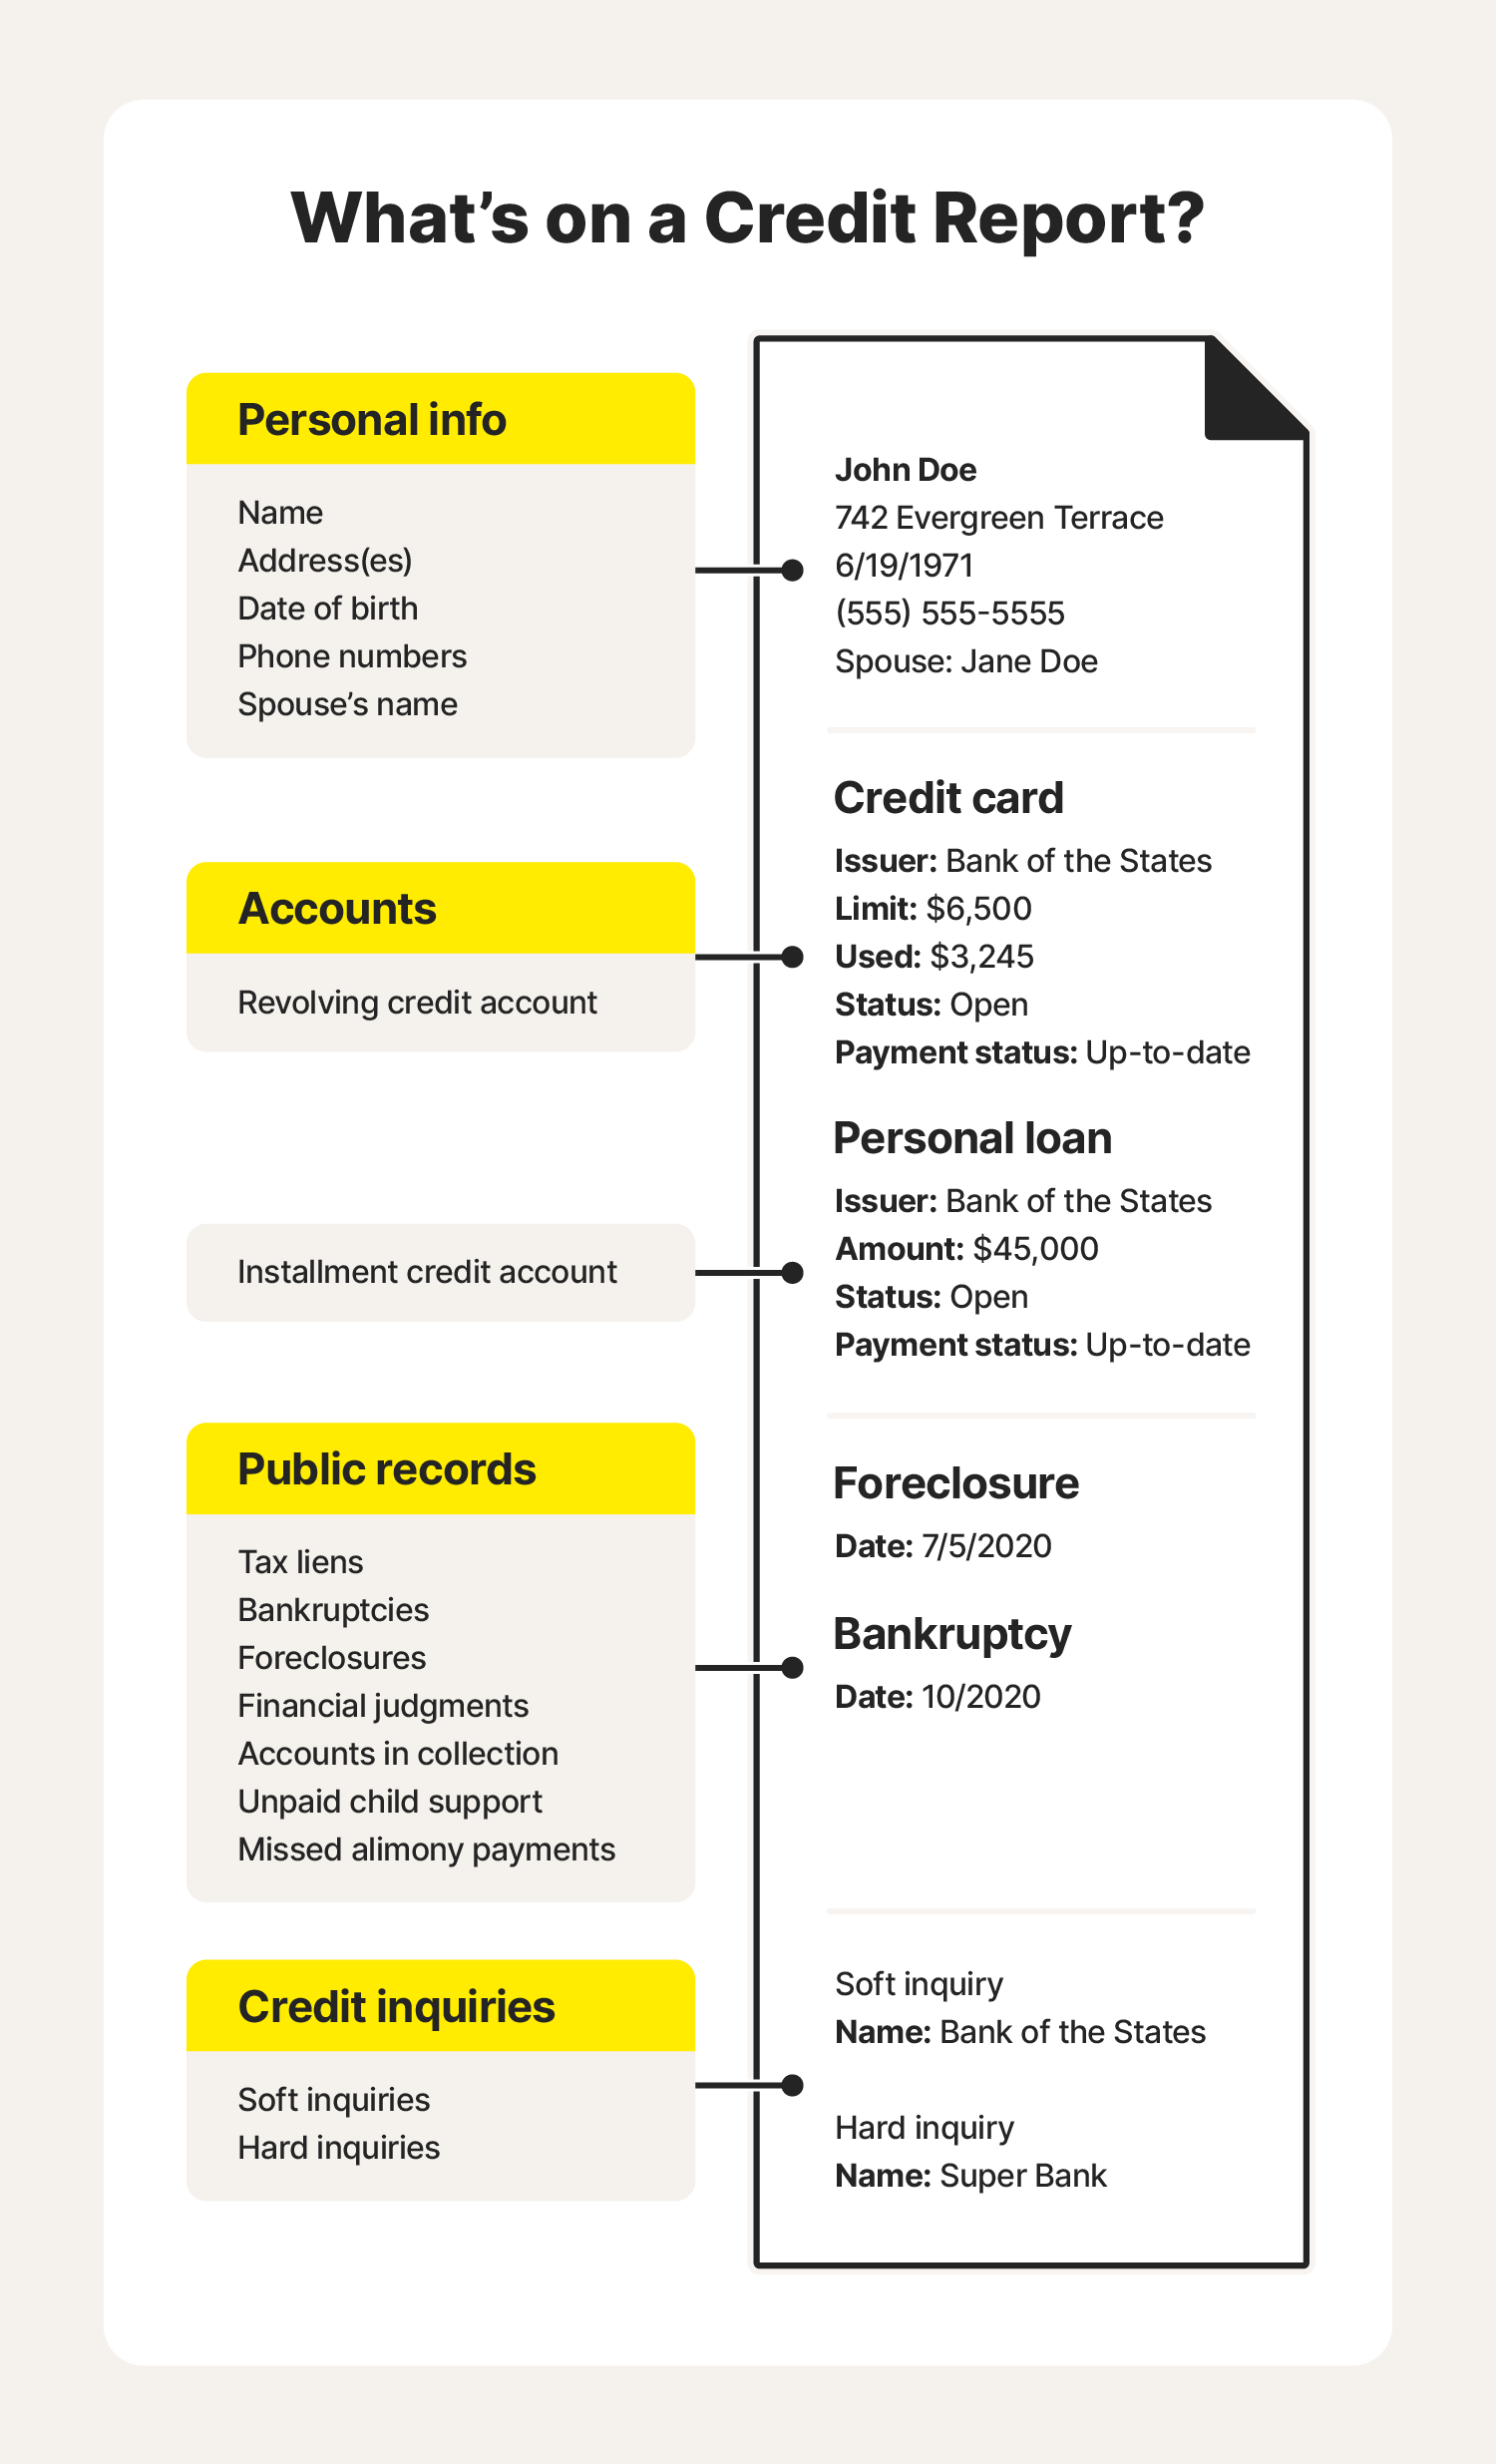 A graphic overview of the contents of a credit report further answers the question, "What is a credit report?"